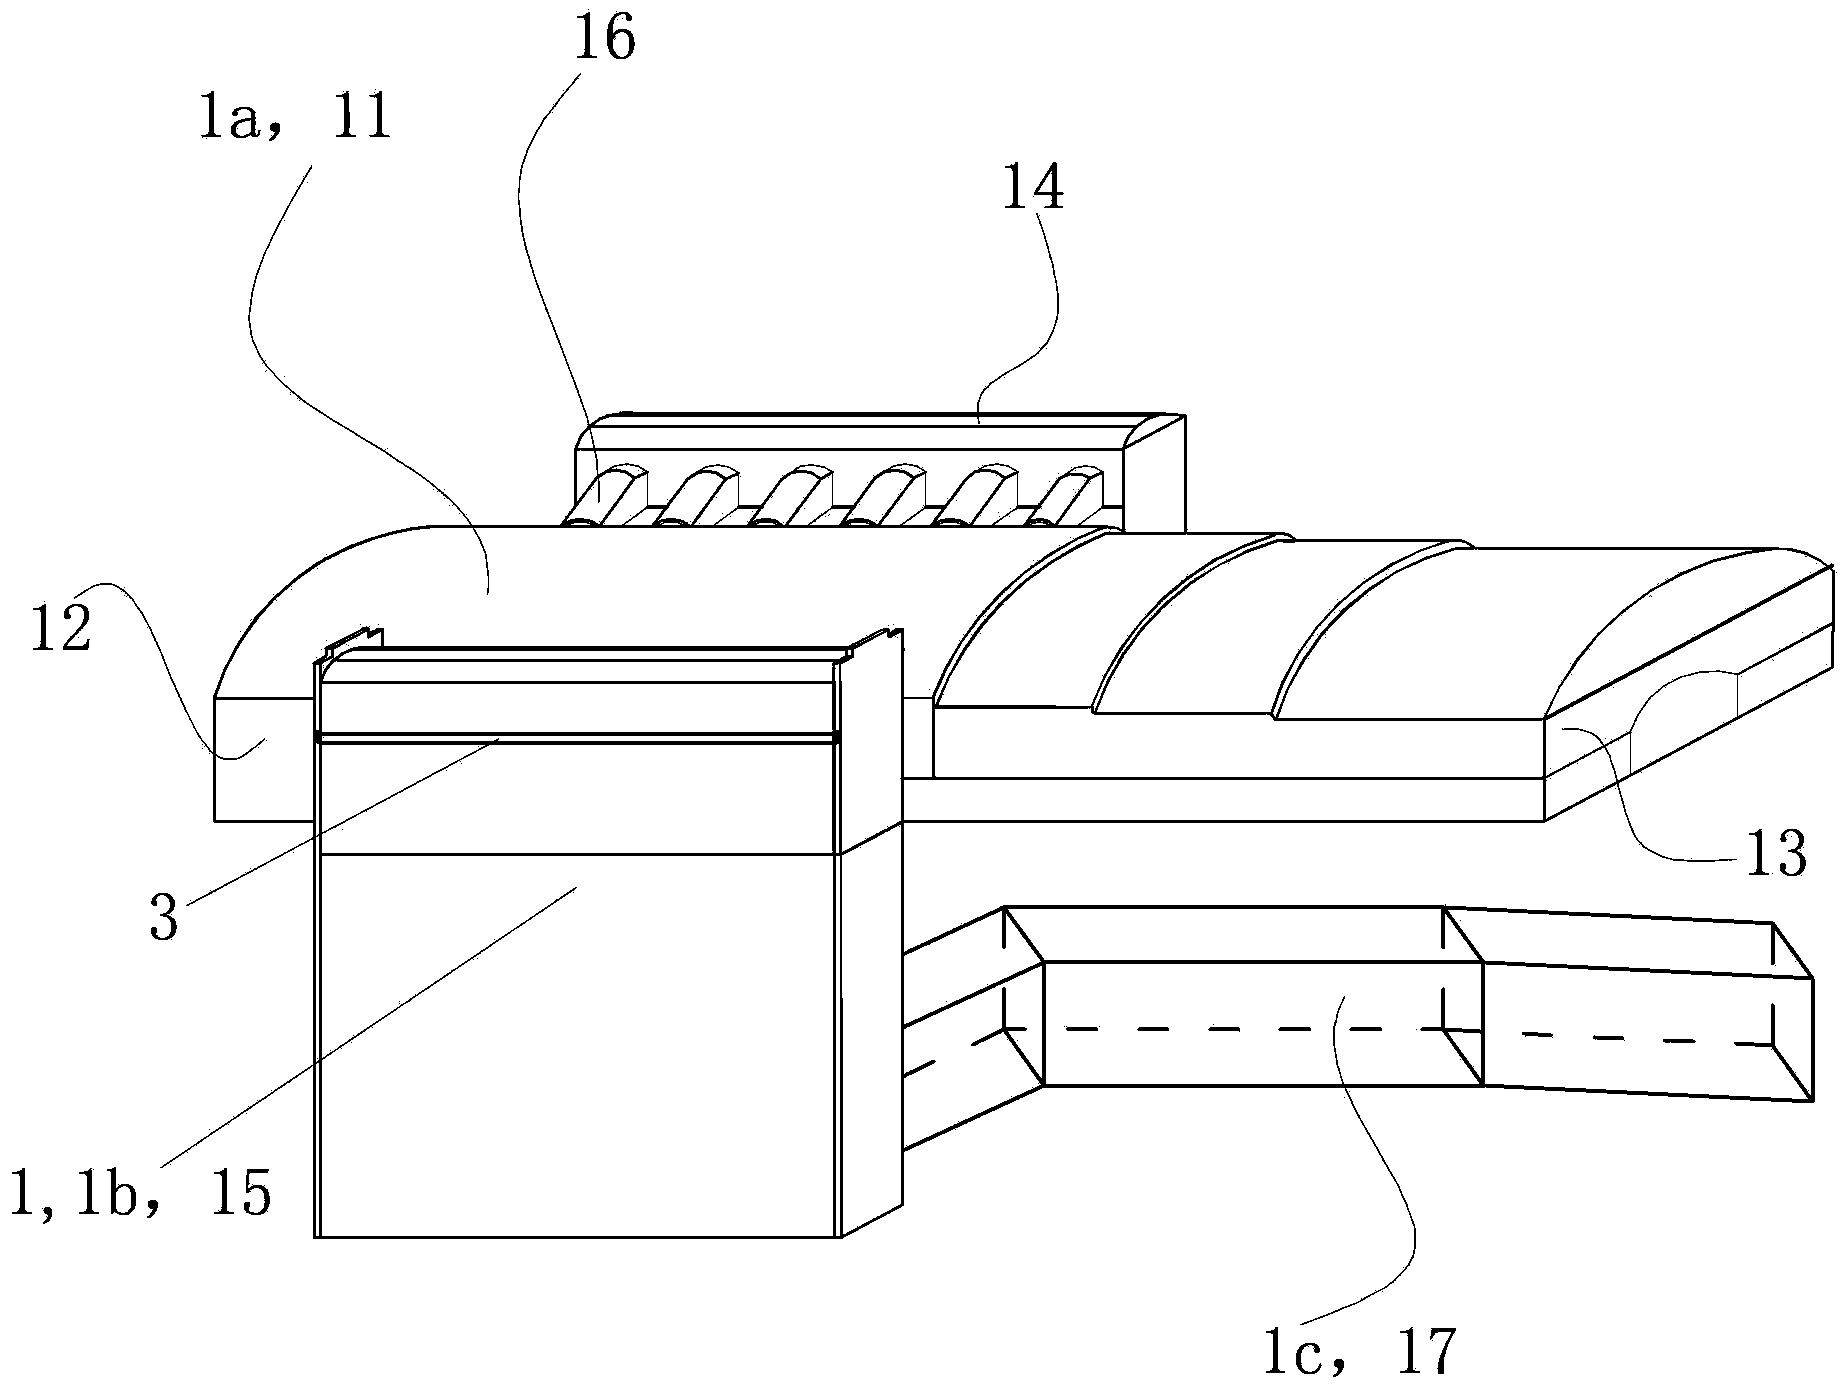 Insulation apparatus for glass tank furnace